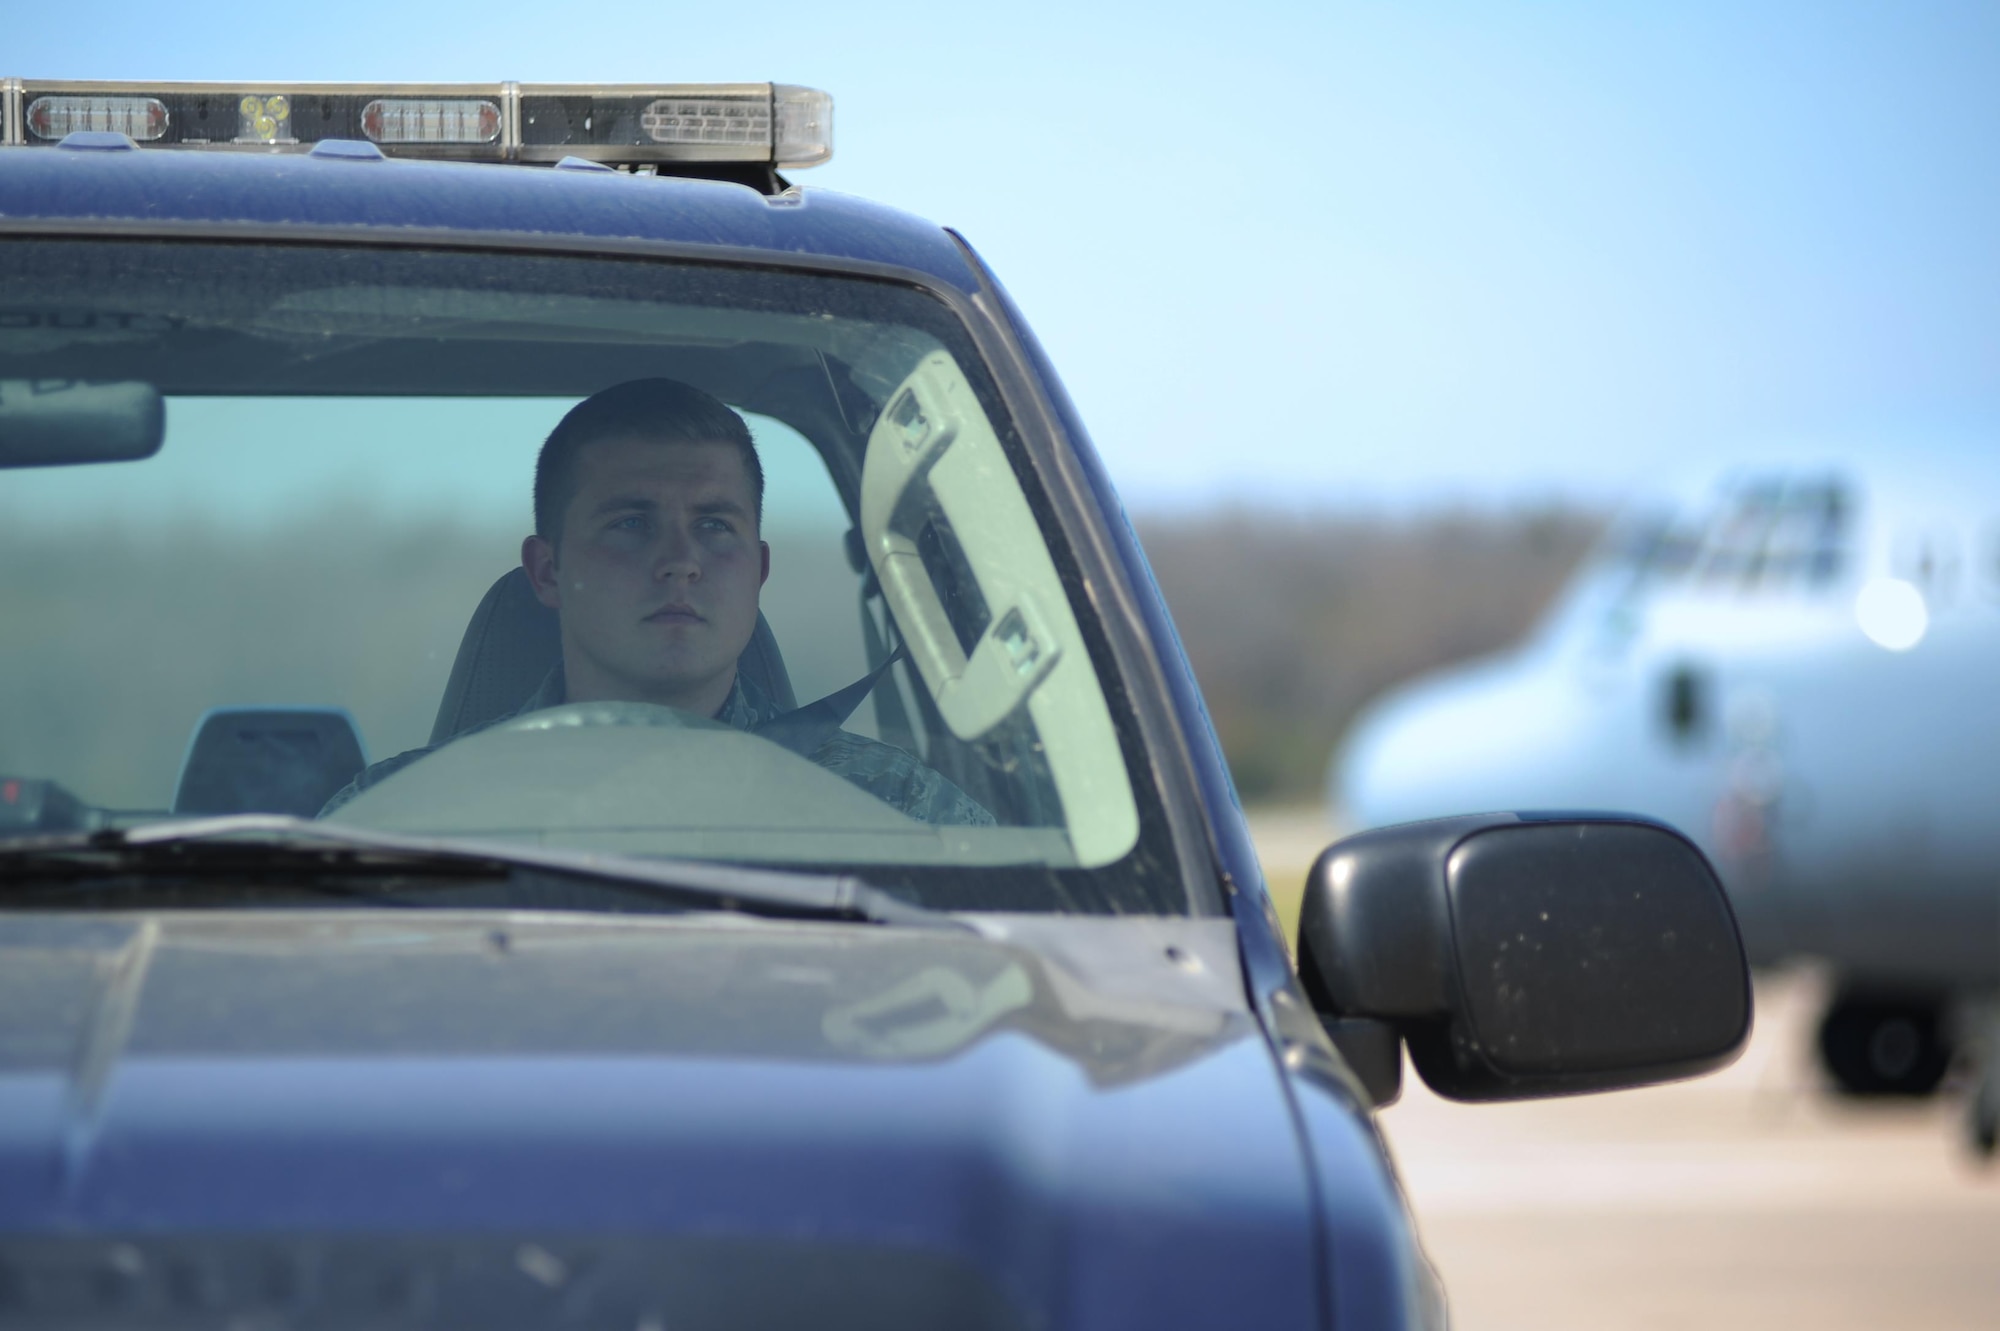 U.S. Air Force Senior Airman Joseph Way, 19th Operations Support Squadron Airfield Management shift lead, looks for safety hazards March 20, 2017, on the flightline at Little Rock Air Force Base, Ark. The airfield management team conducts airfield checks every two hours, looking for problems from potholes to foreign objects and debris. (U.S. Air Force photo by Airman 1st Class Grace Nichols)